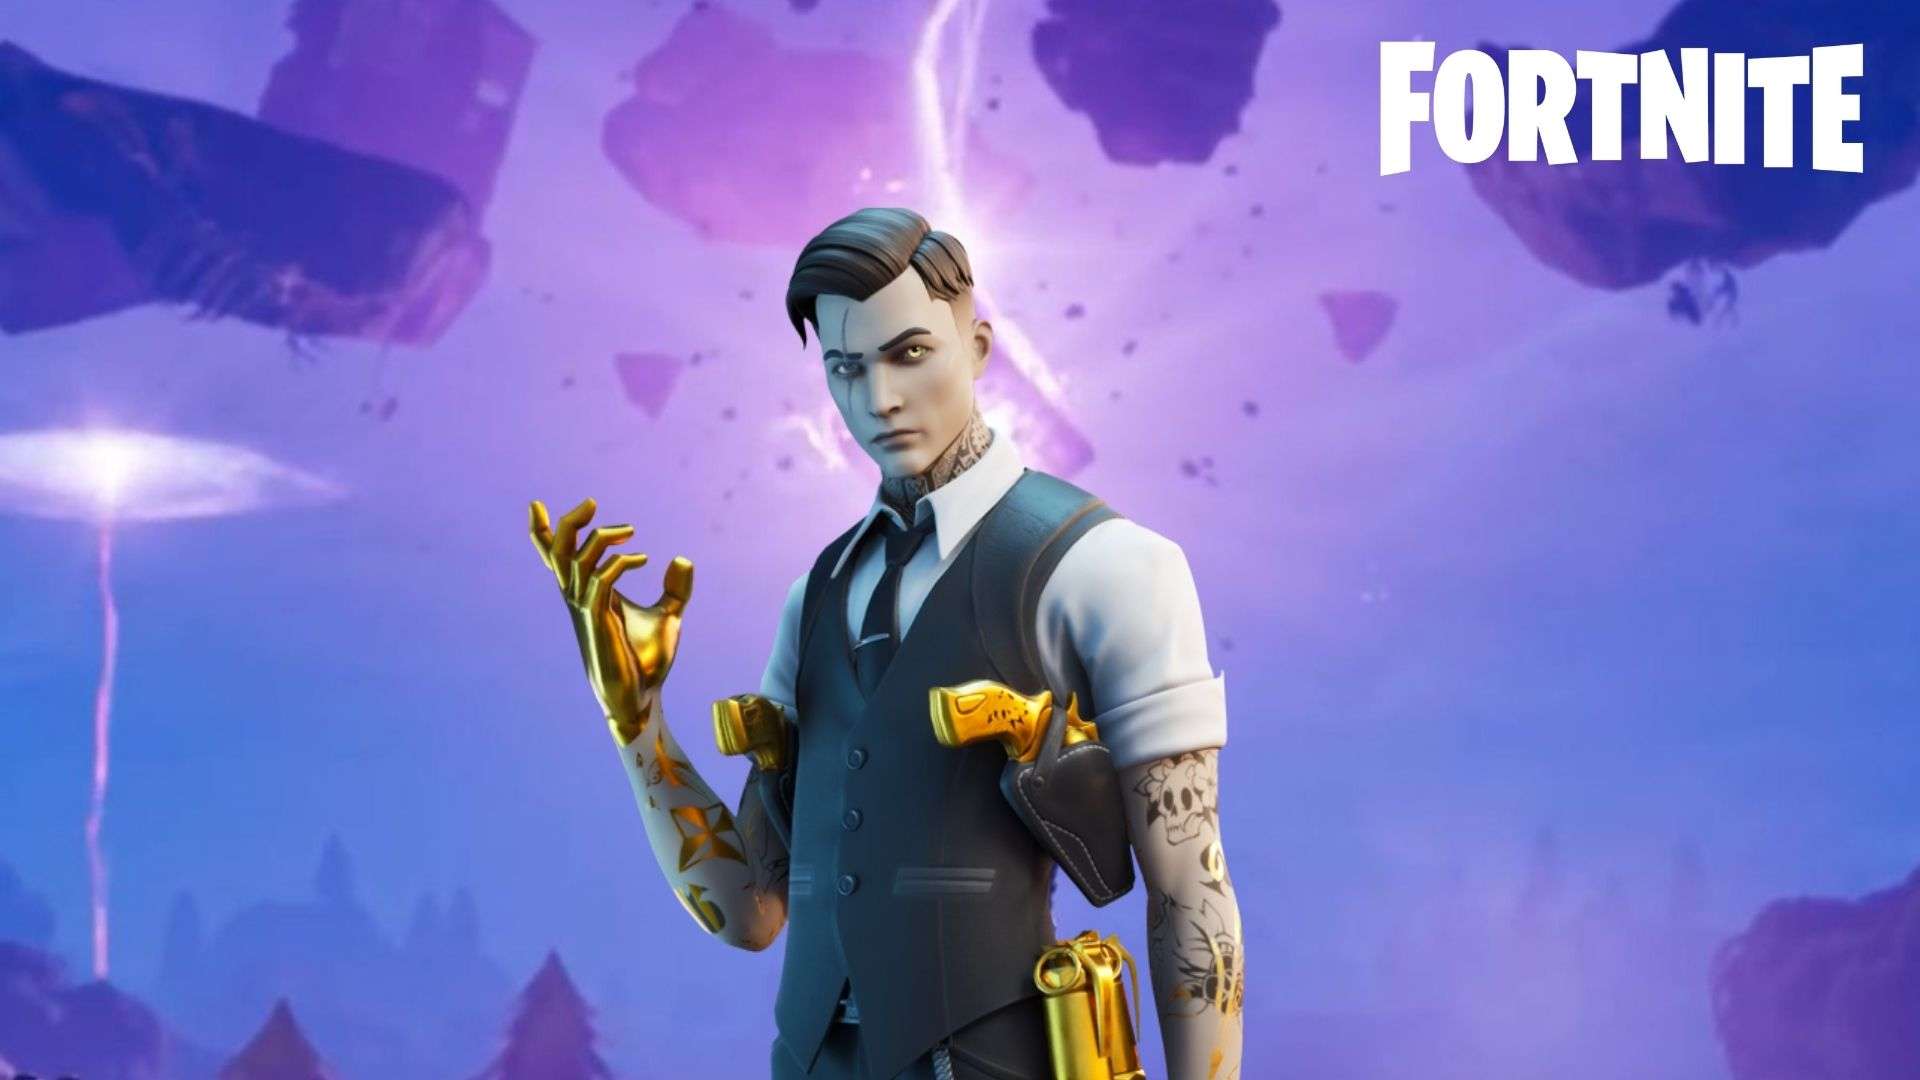 Featured image of post Midas Fortnite Wallpaper Cave / 713 x 1141 jpeg 169 kb.